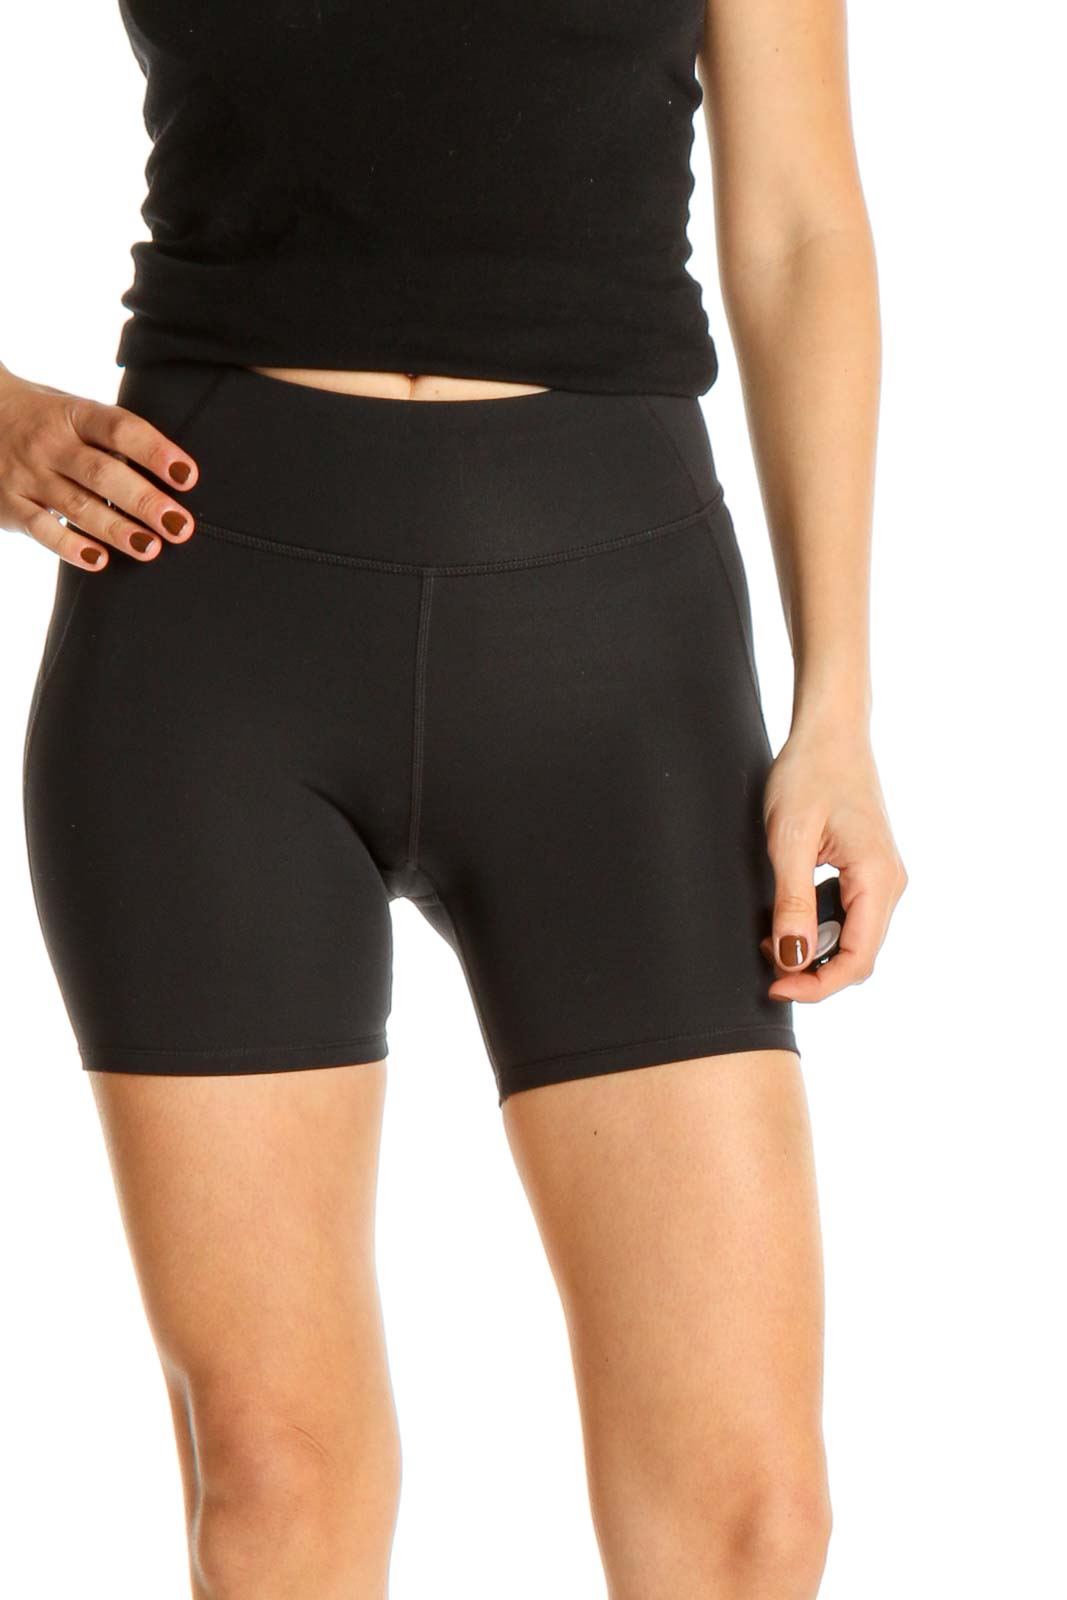 Black Solid Activewear Shorts Front